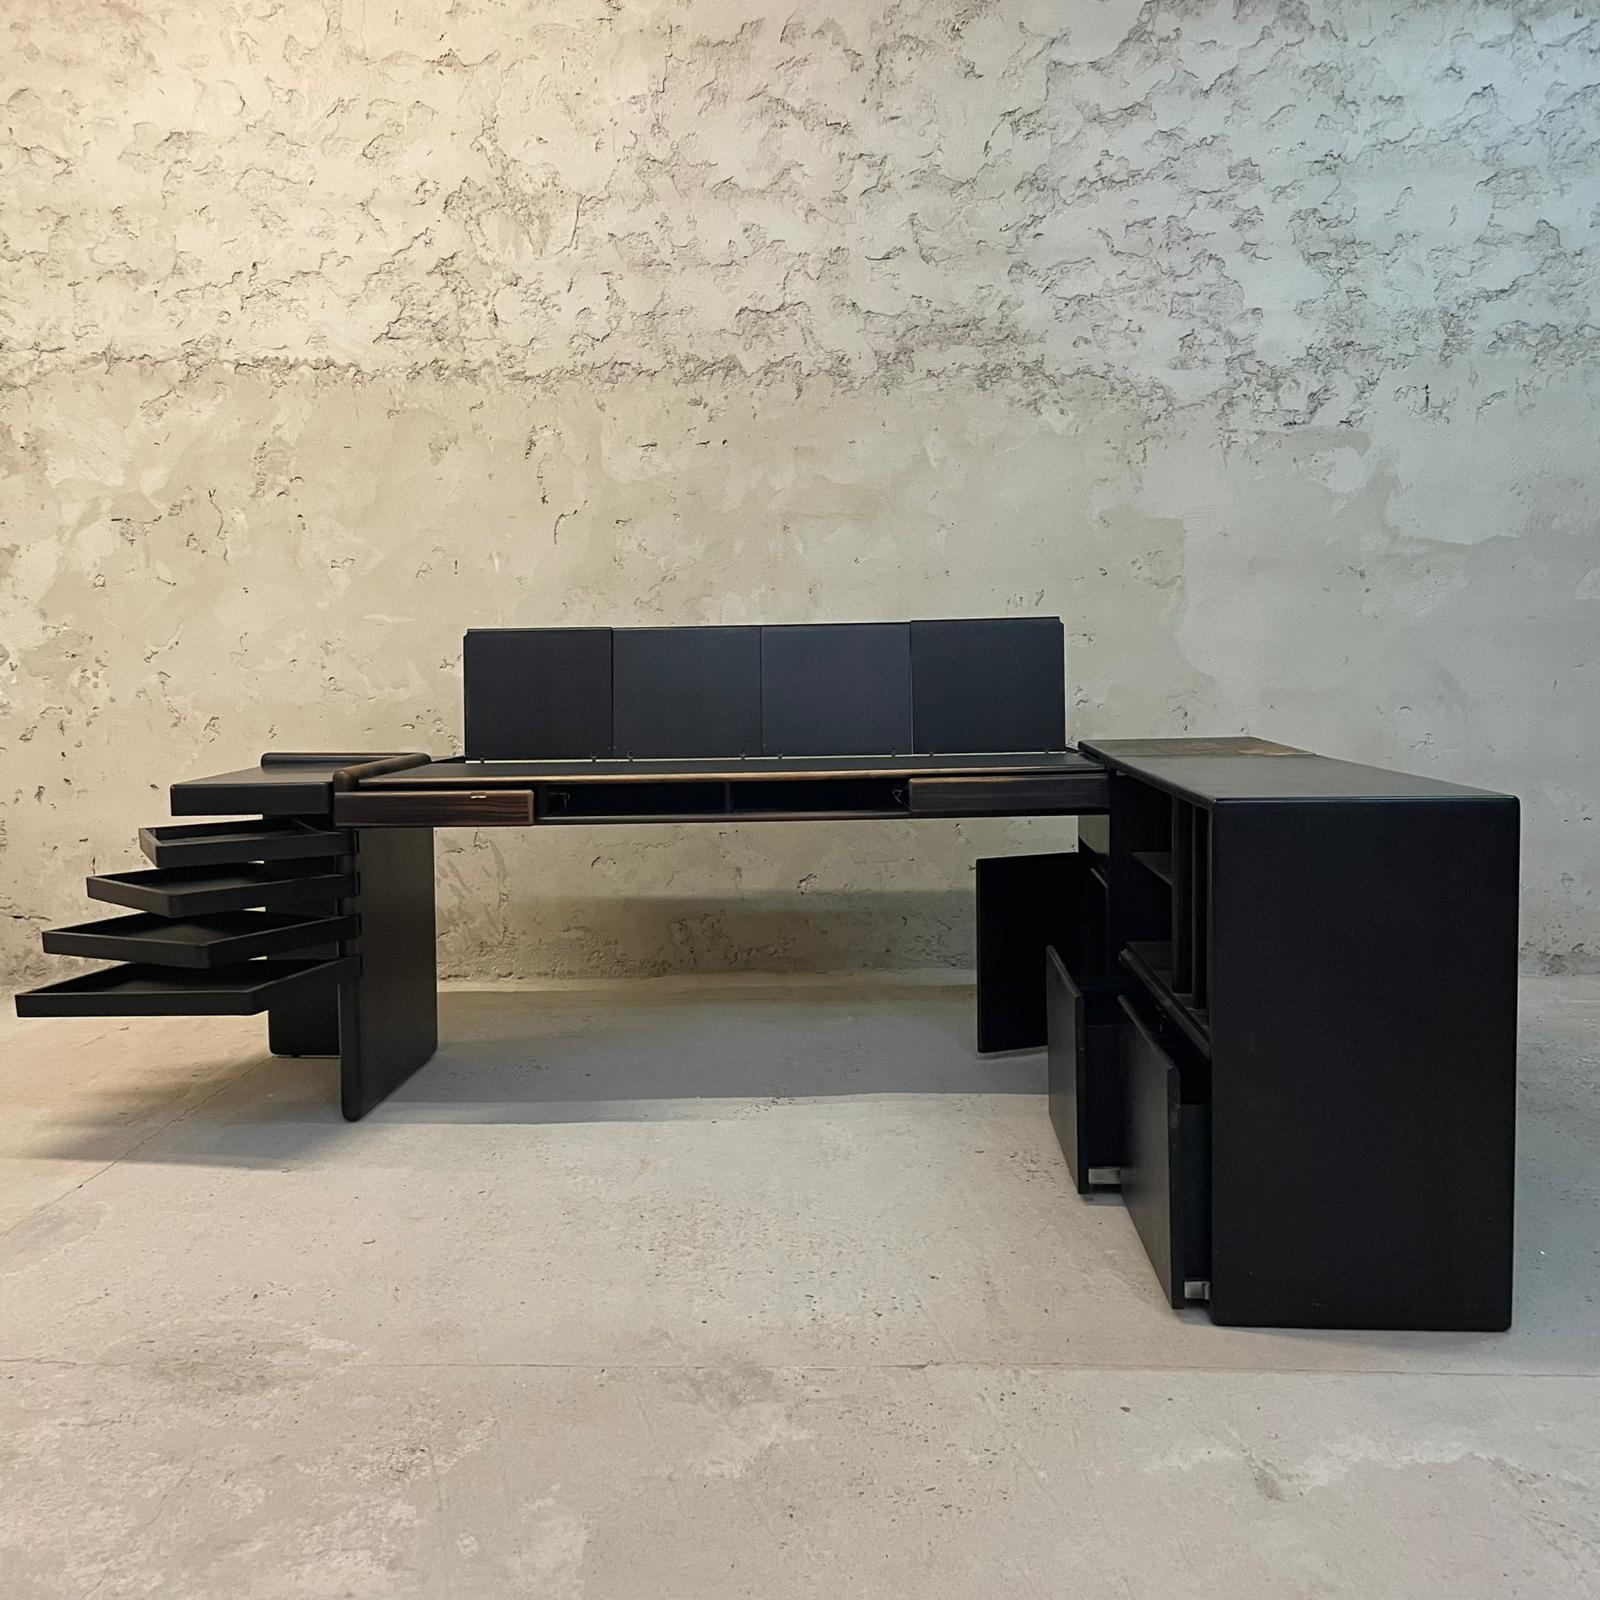 Executive and exceptionally rare ebony executive desk designed by Fabio Lenci for Bernini in 1974. Four compass trays, two front drawers, four folding compartments with plastic trays each, magazine rack, trash can, removable ashtray cast iron, side